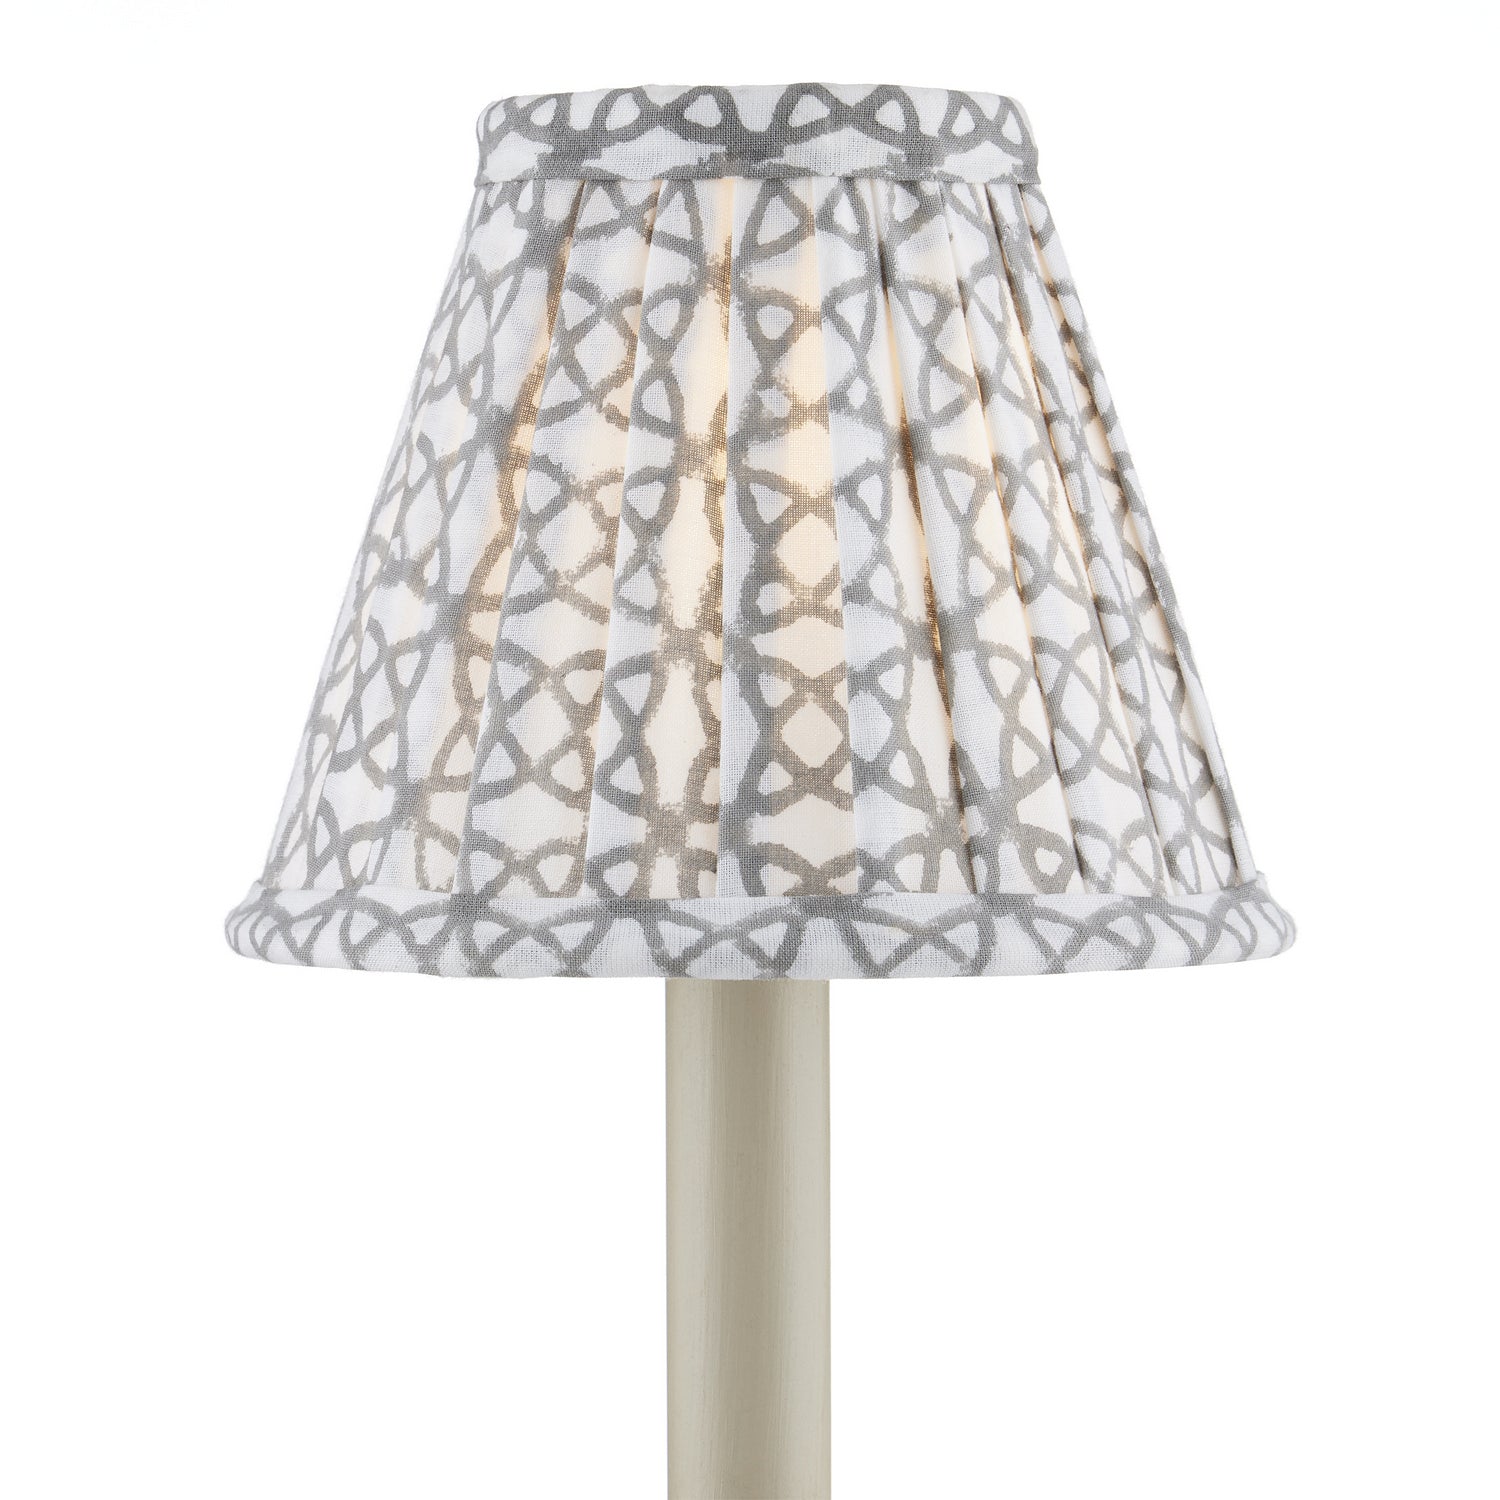 Chandelier Shade in Natural/Gray finish